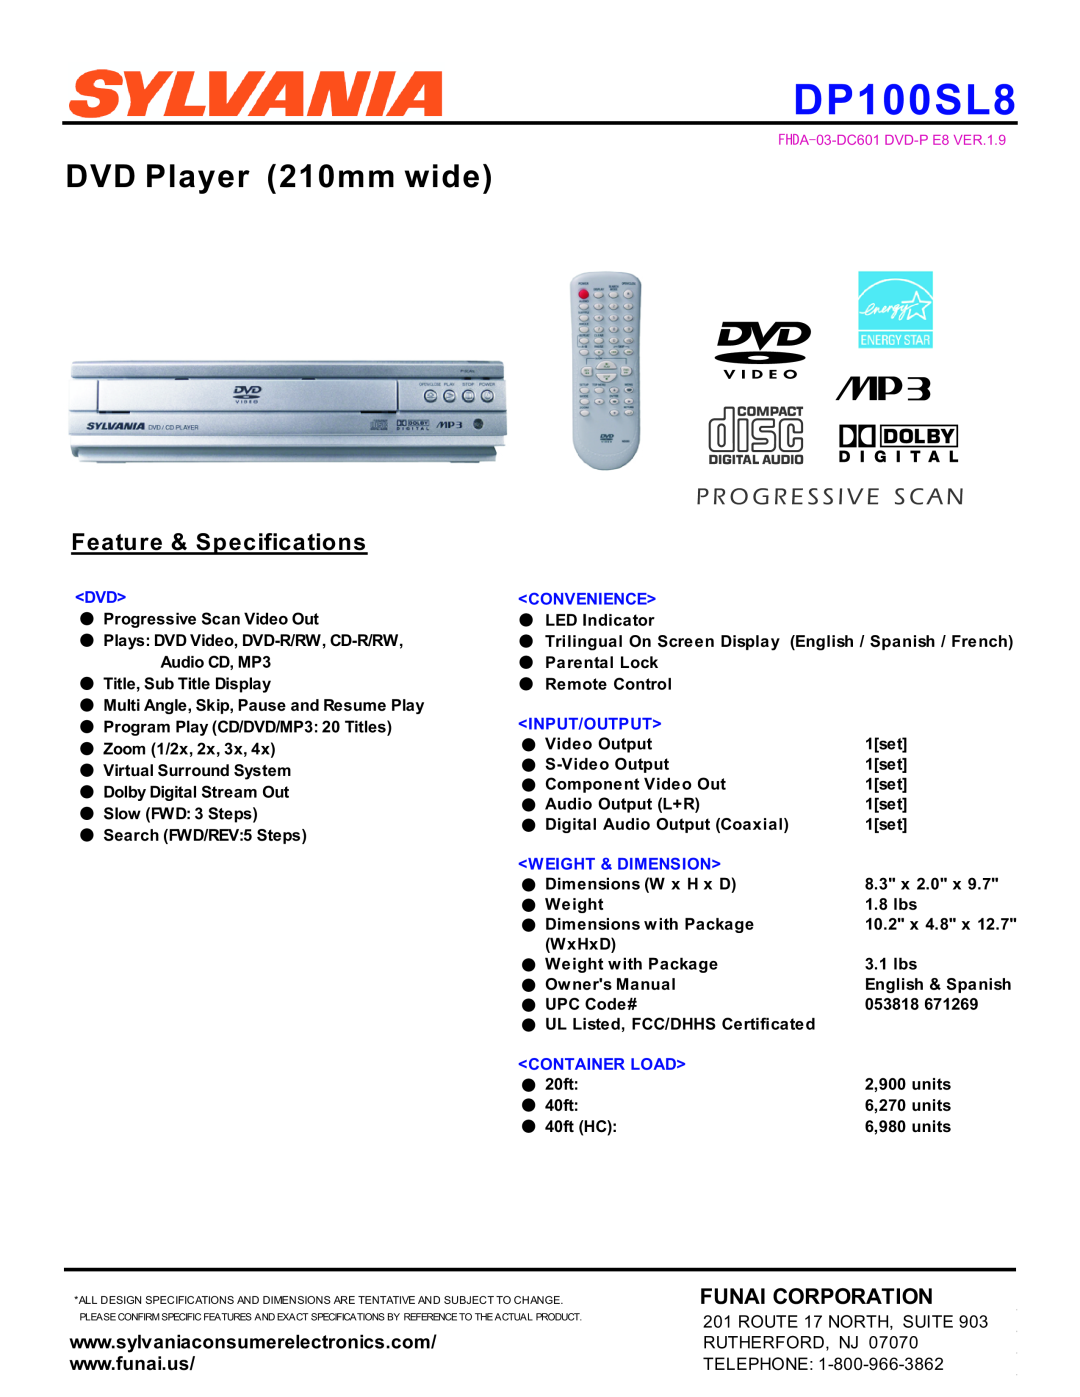 Sylvania DP100SL8 specifications DVD Player 210mm wide, Feature & Specifications, Funai Corporation, ROUTE 17 NORTH, SUITE 